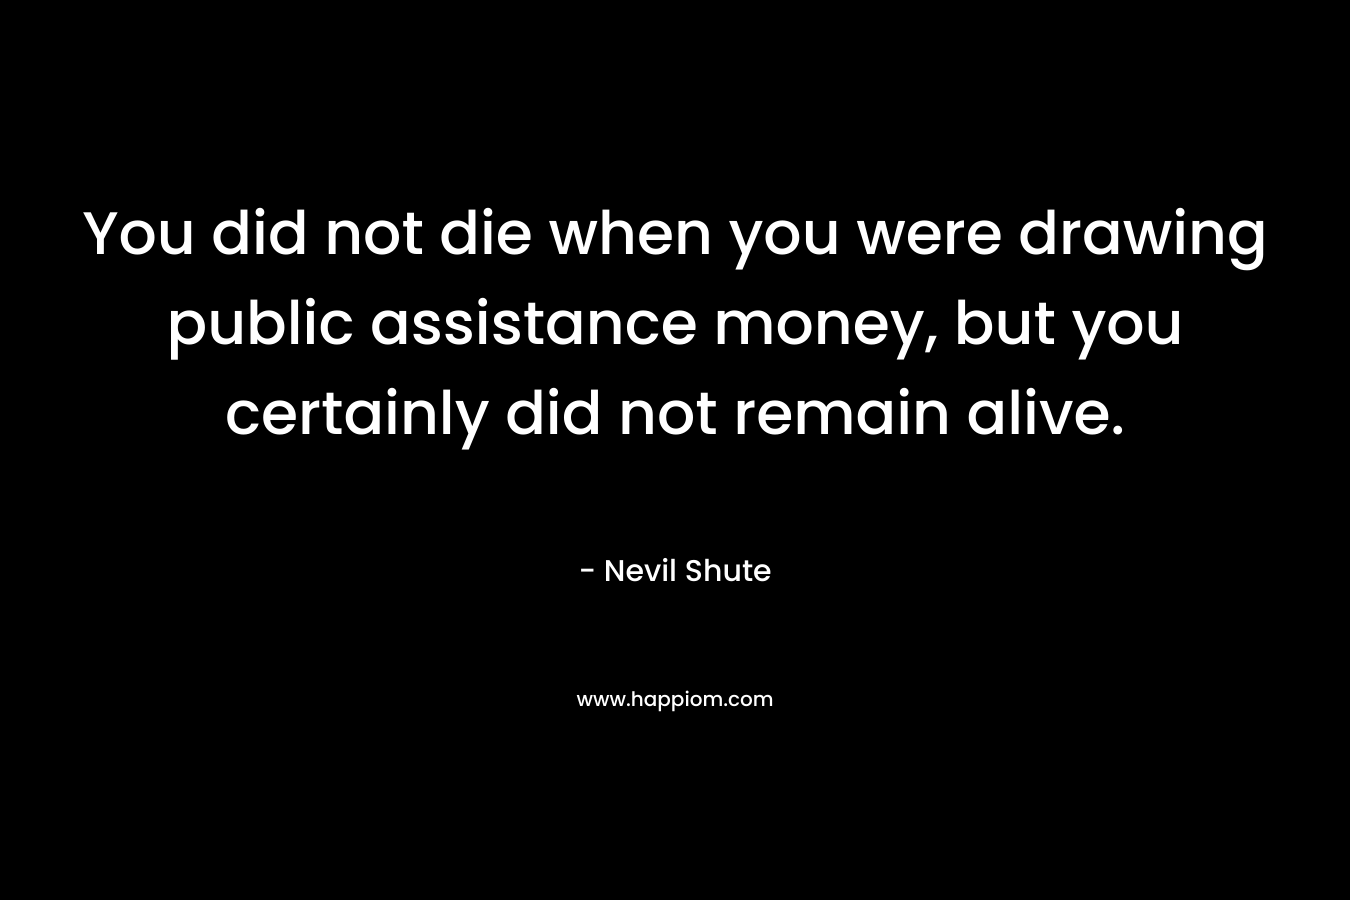 You did not die when you were drawing public assistance money, but you certainly did not remain alive. – Nevil Shute